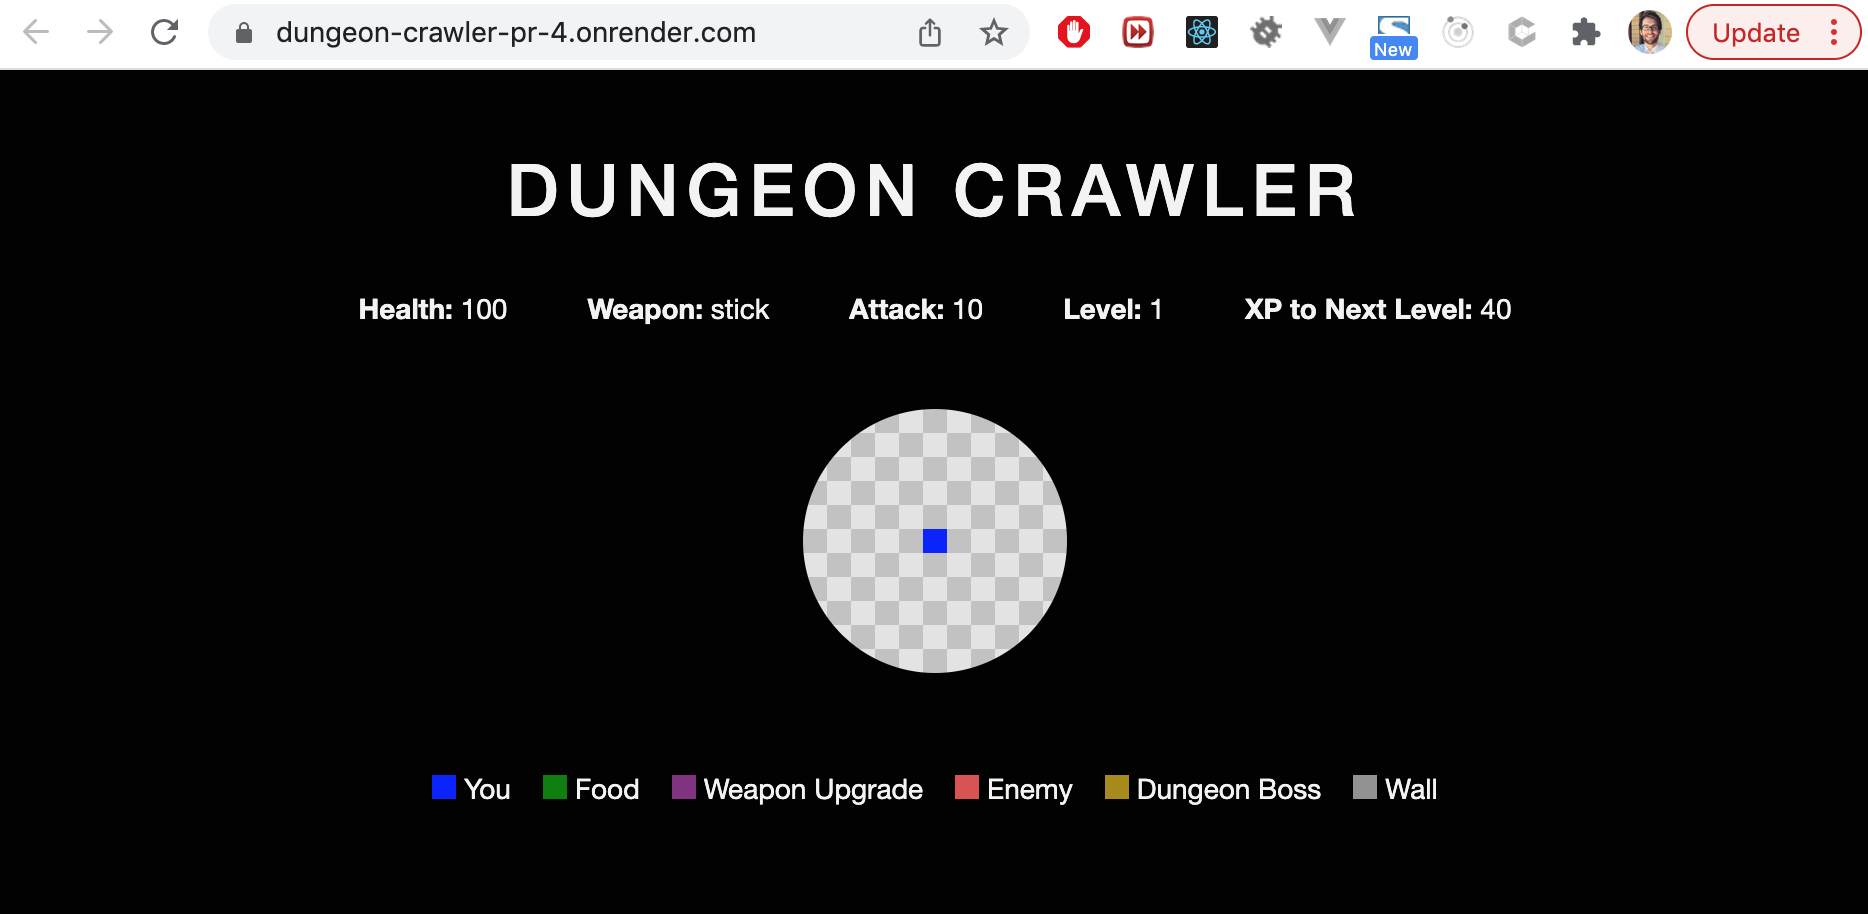 Dungeon crawler app hosted on a PR review app